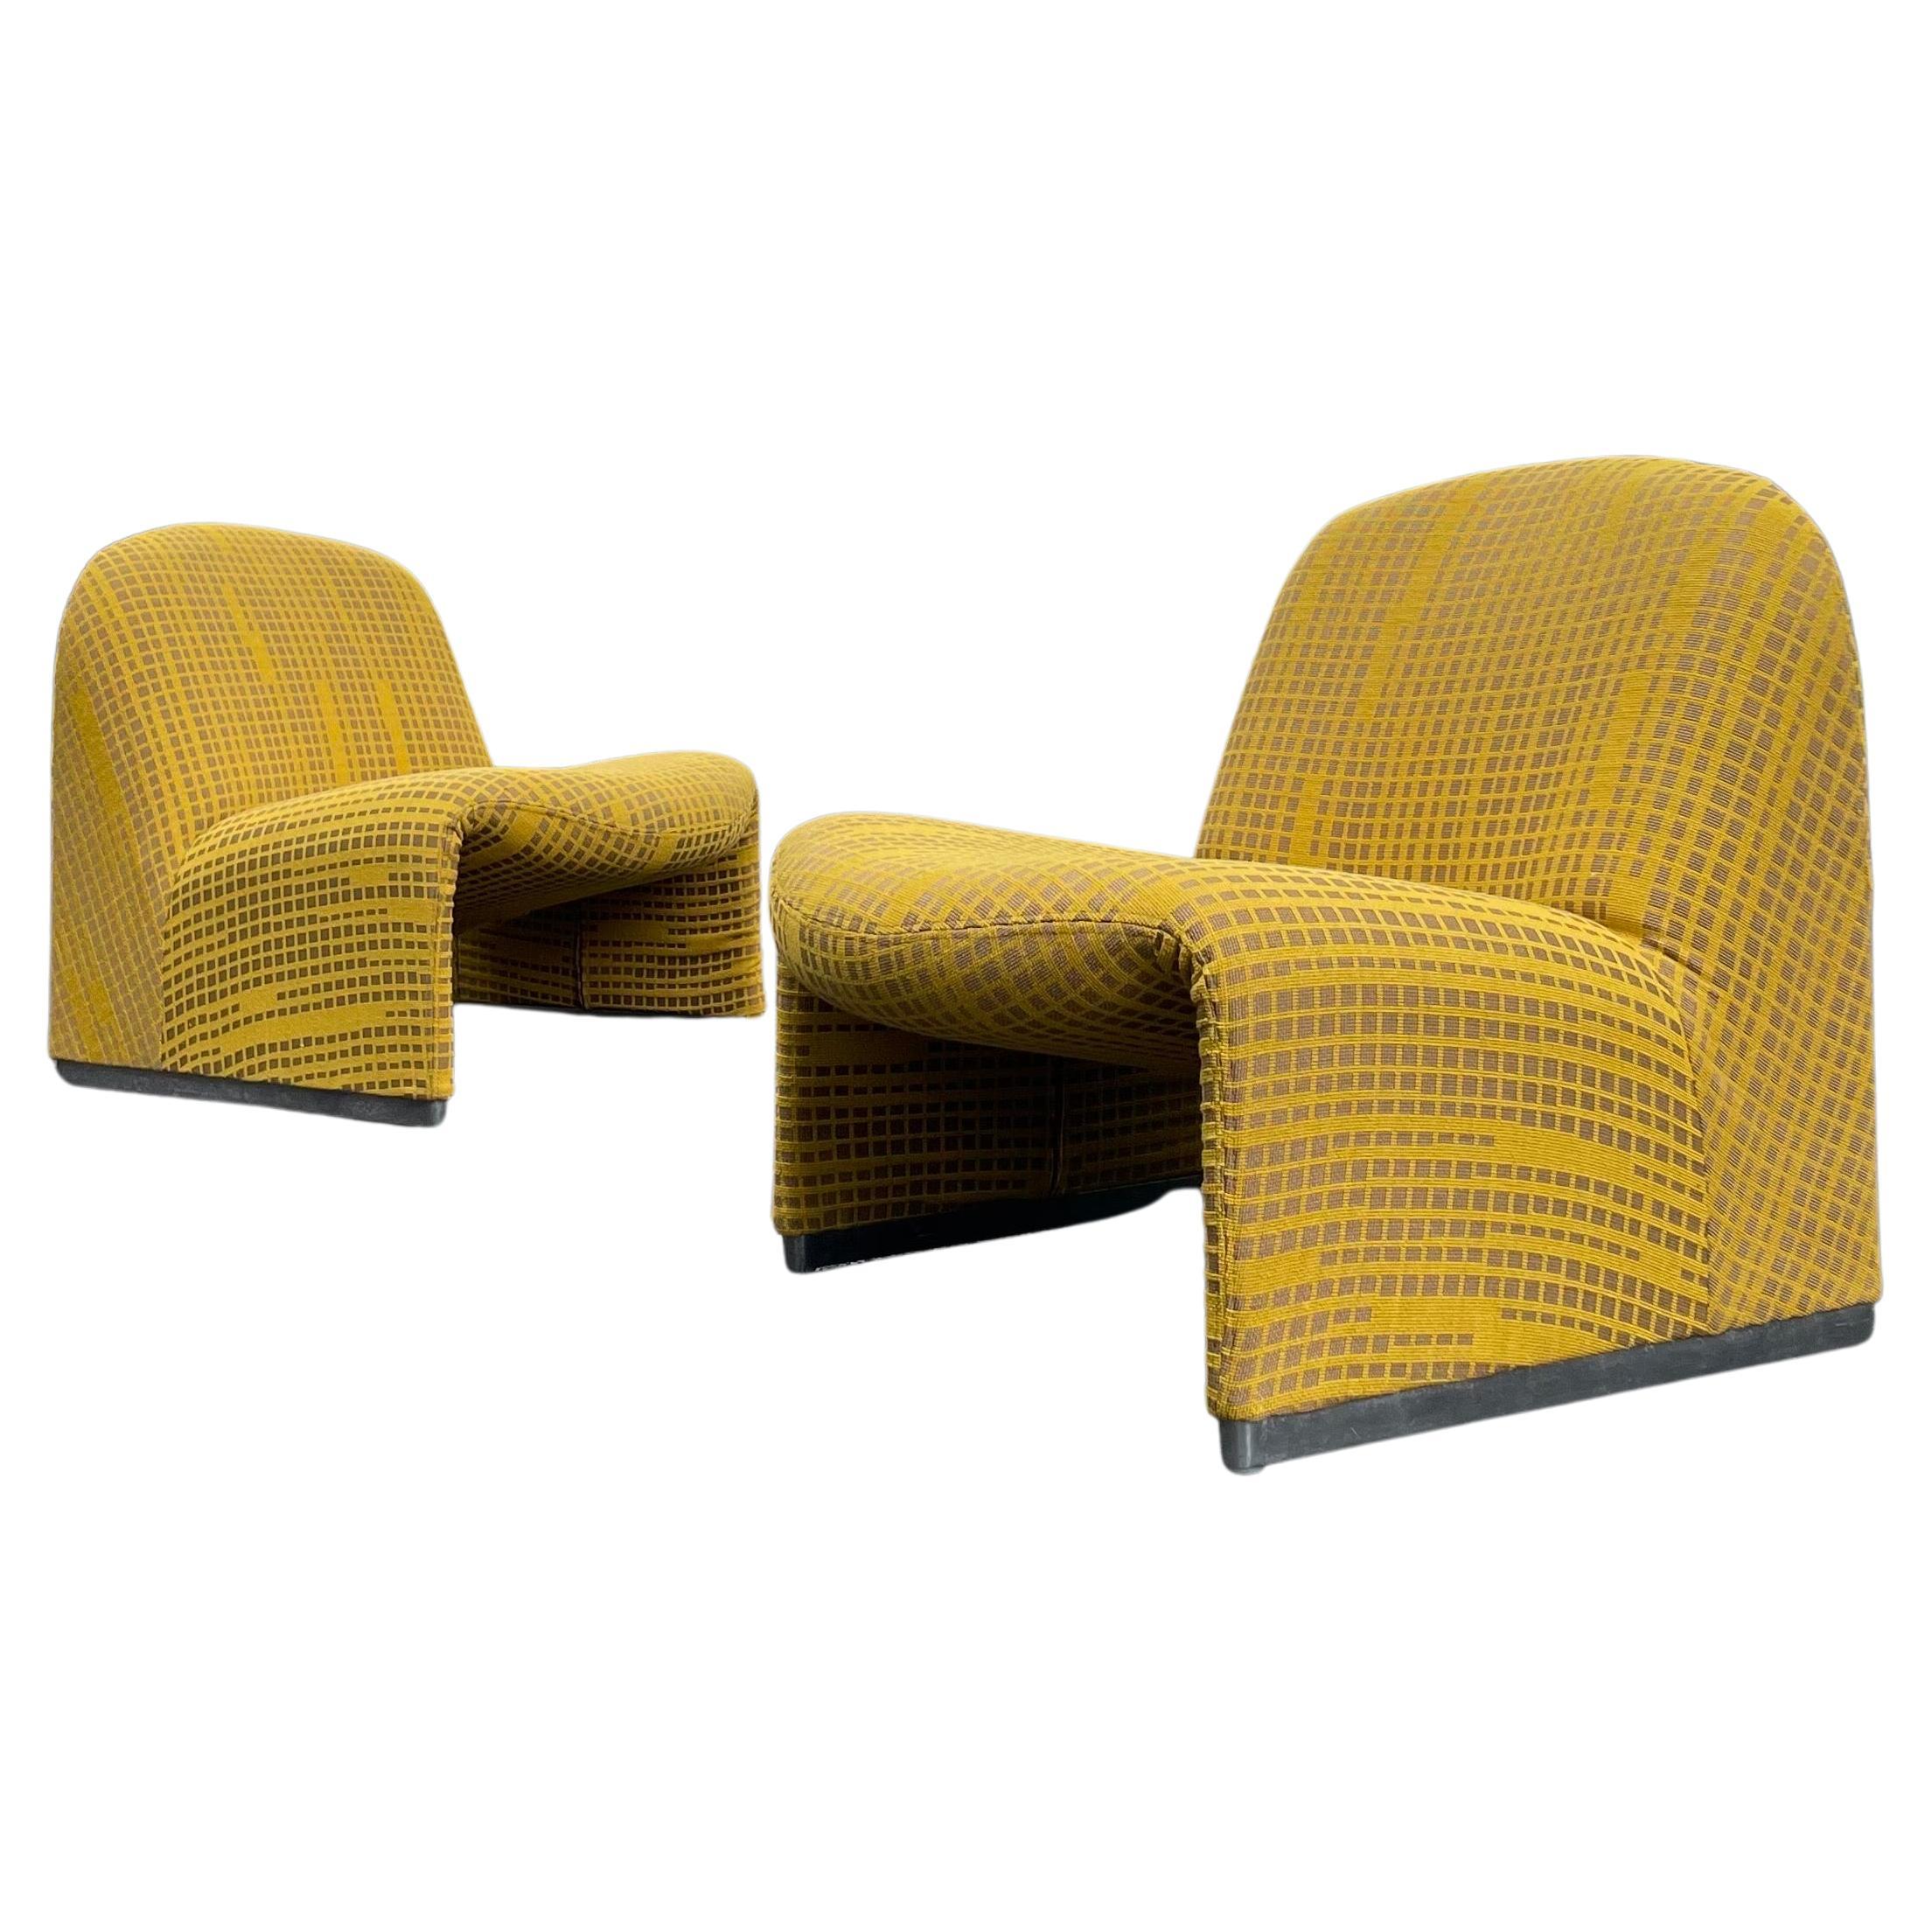 1970s Italian Modern Alky Chairs Alky by Giancarlo Piretti, a Pair For Sale